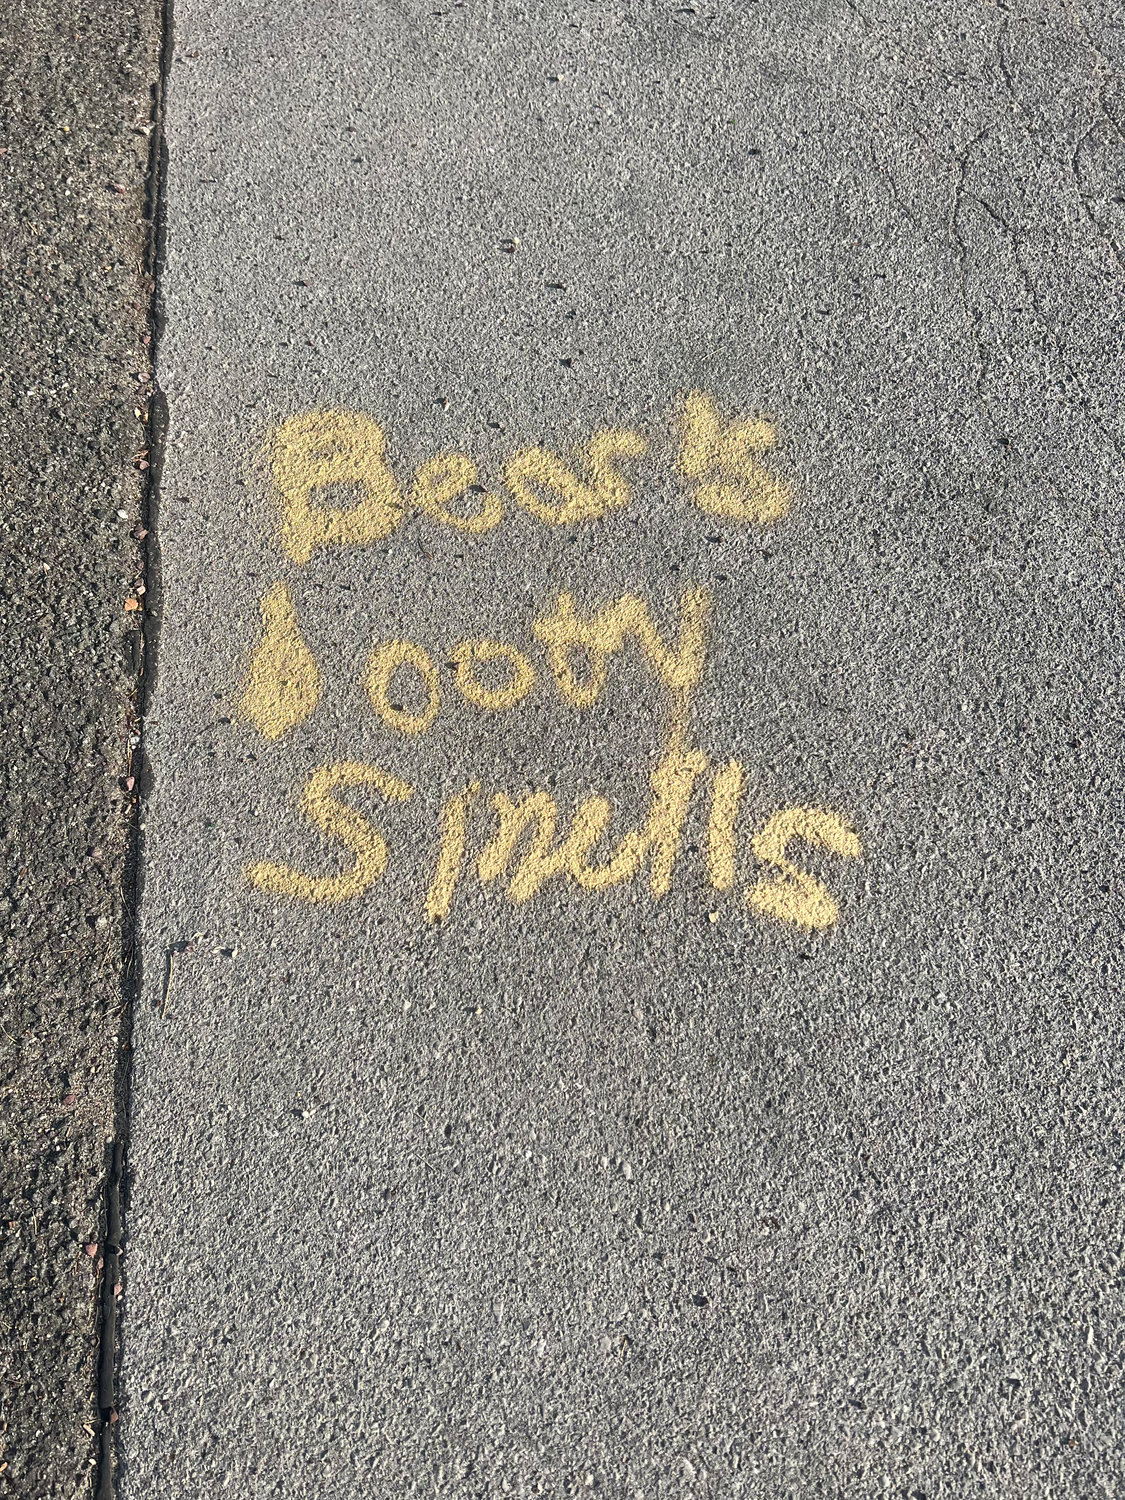 The least offensive derogatory graffiti found outside a Derby Avenue home in Woodmere on Aug. 15.